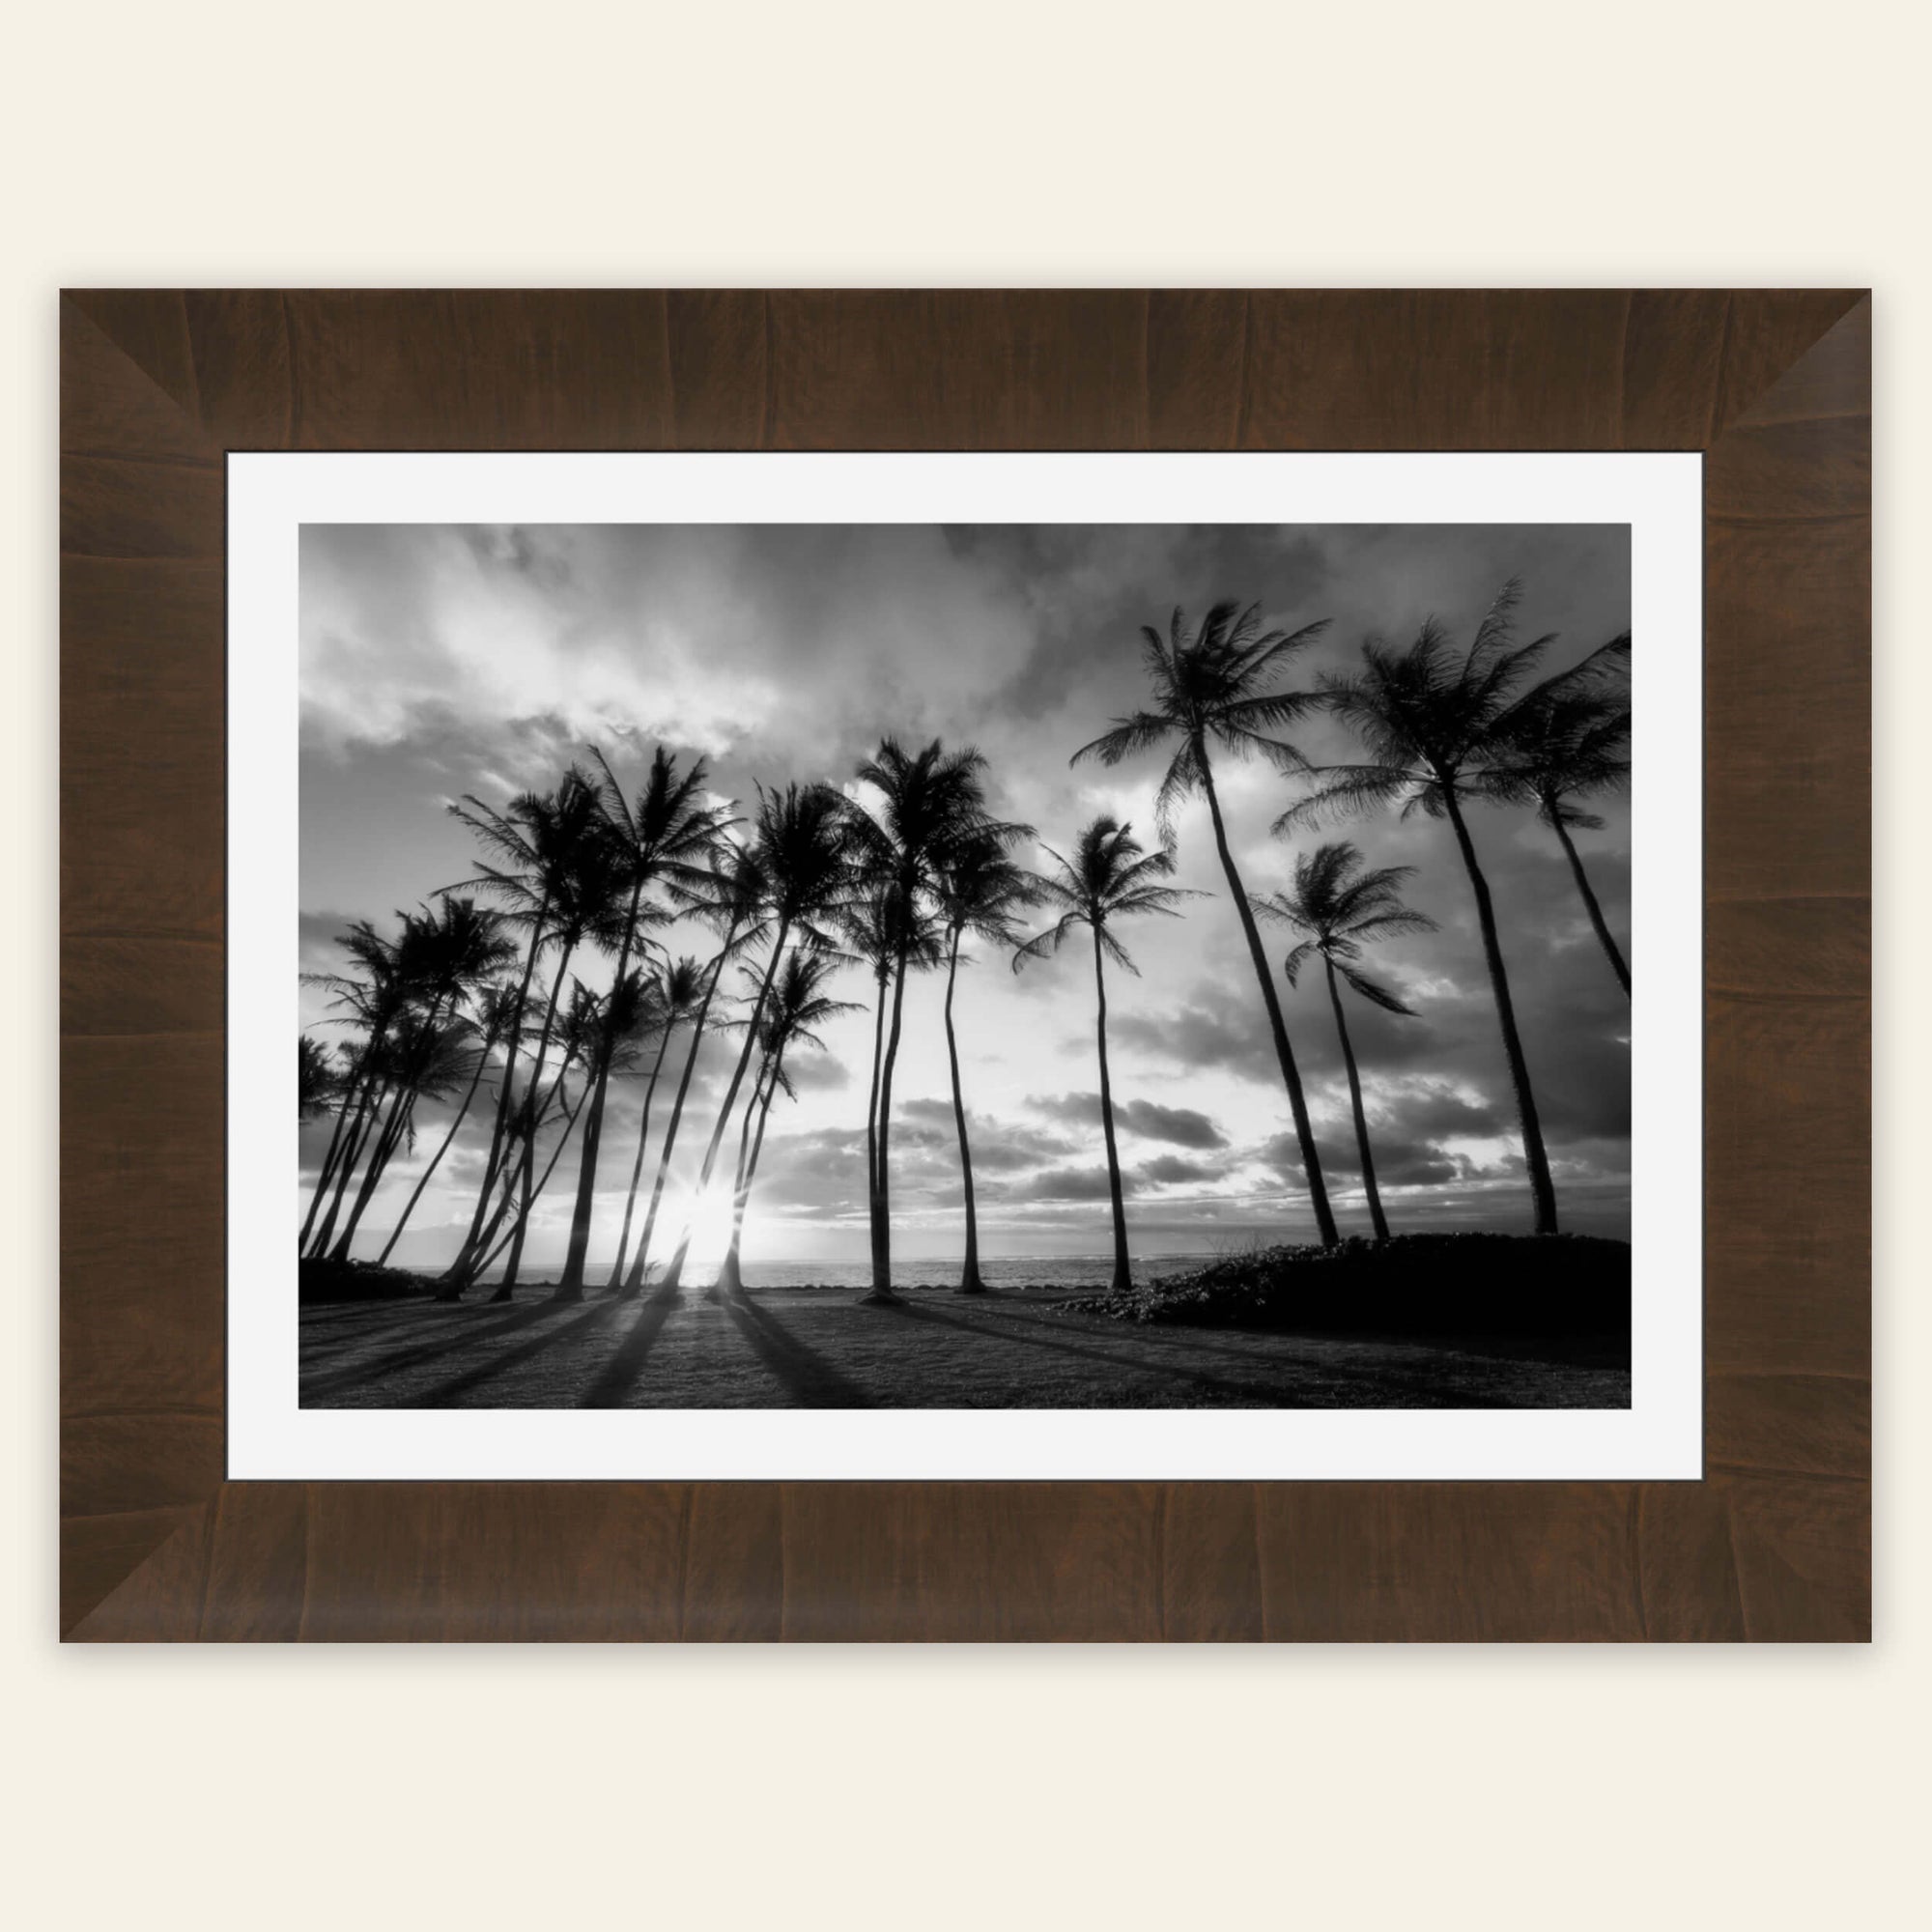 A framed palm tree picture at sunrise in Kapaa, Kauai.